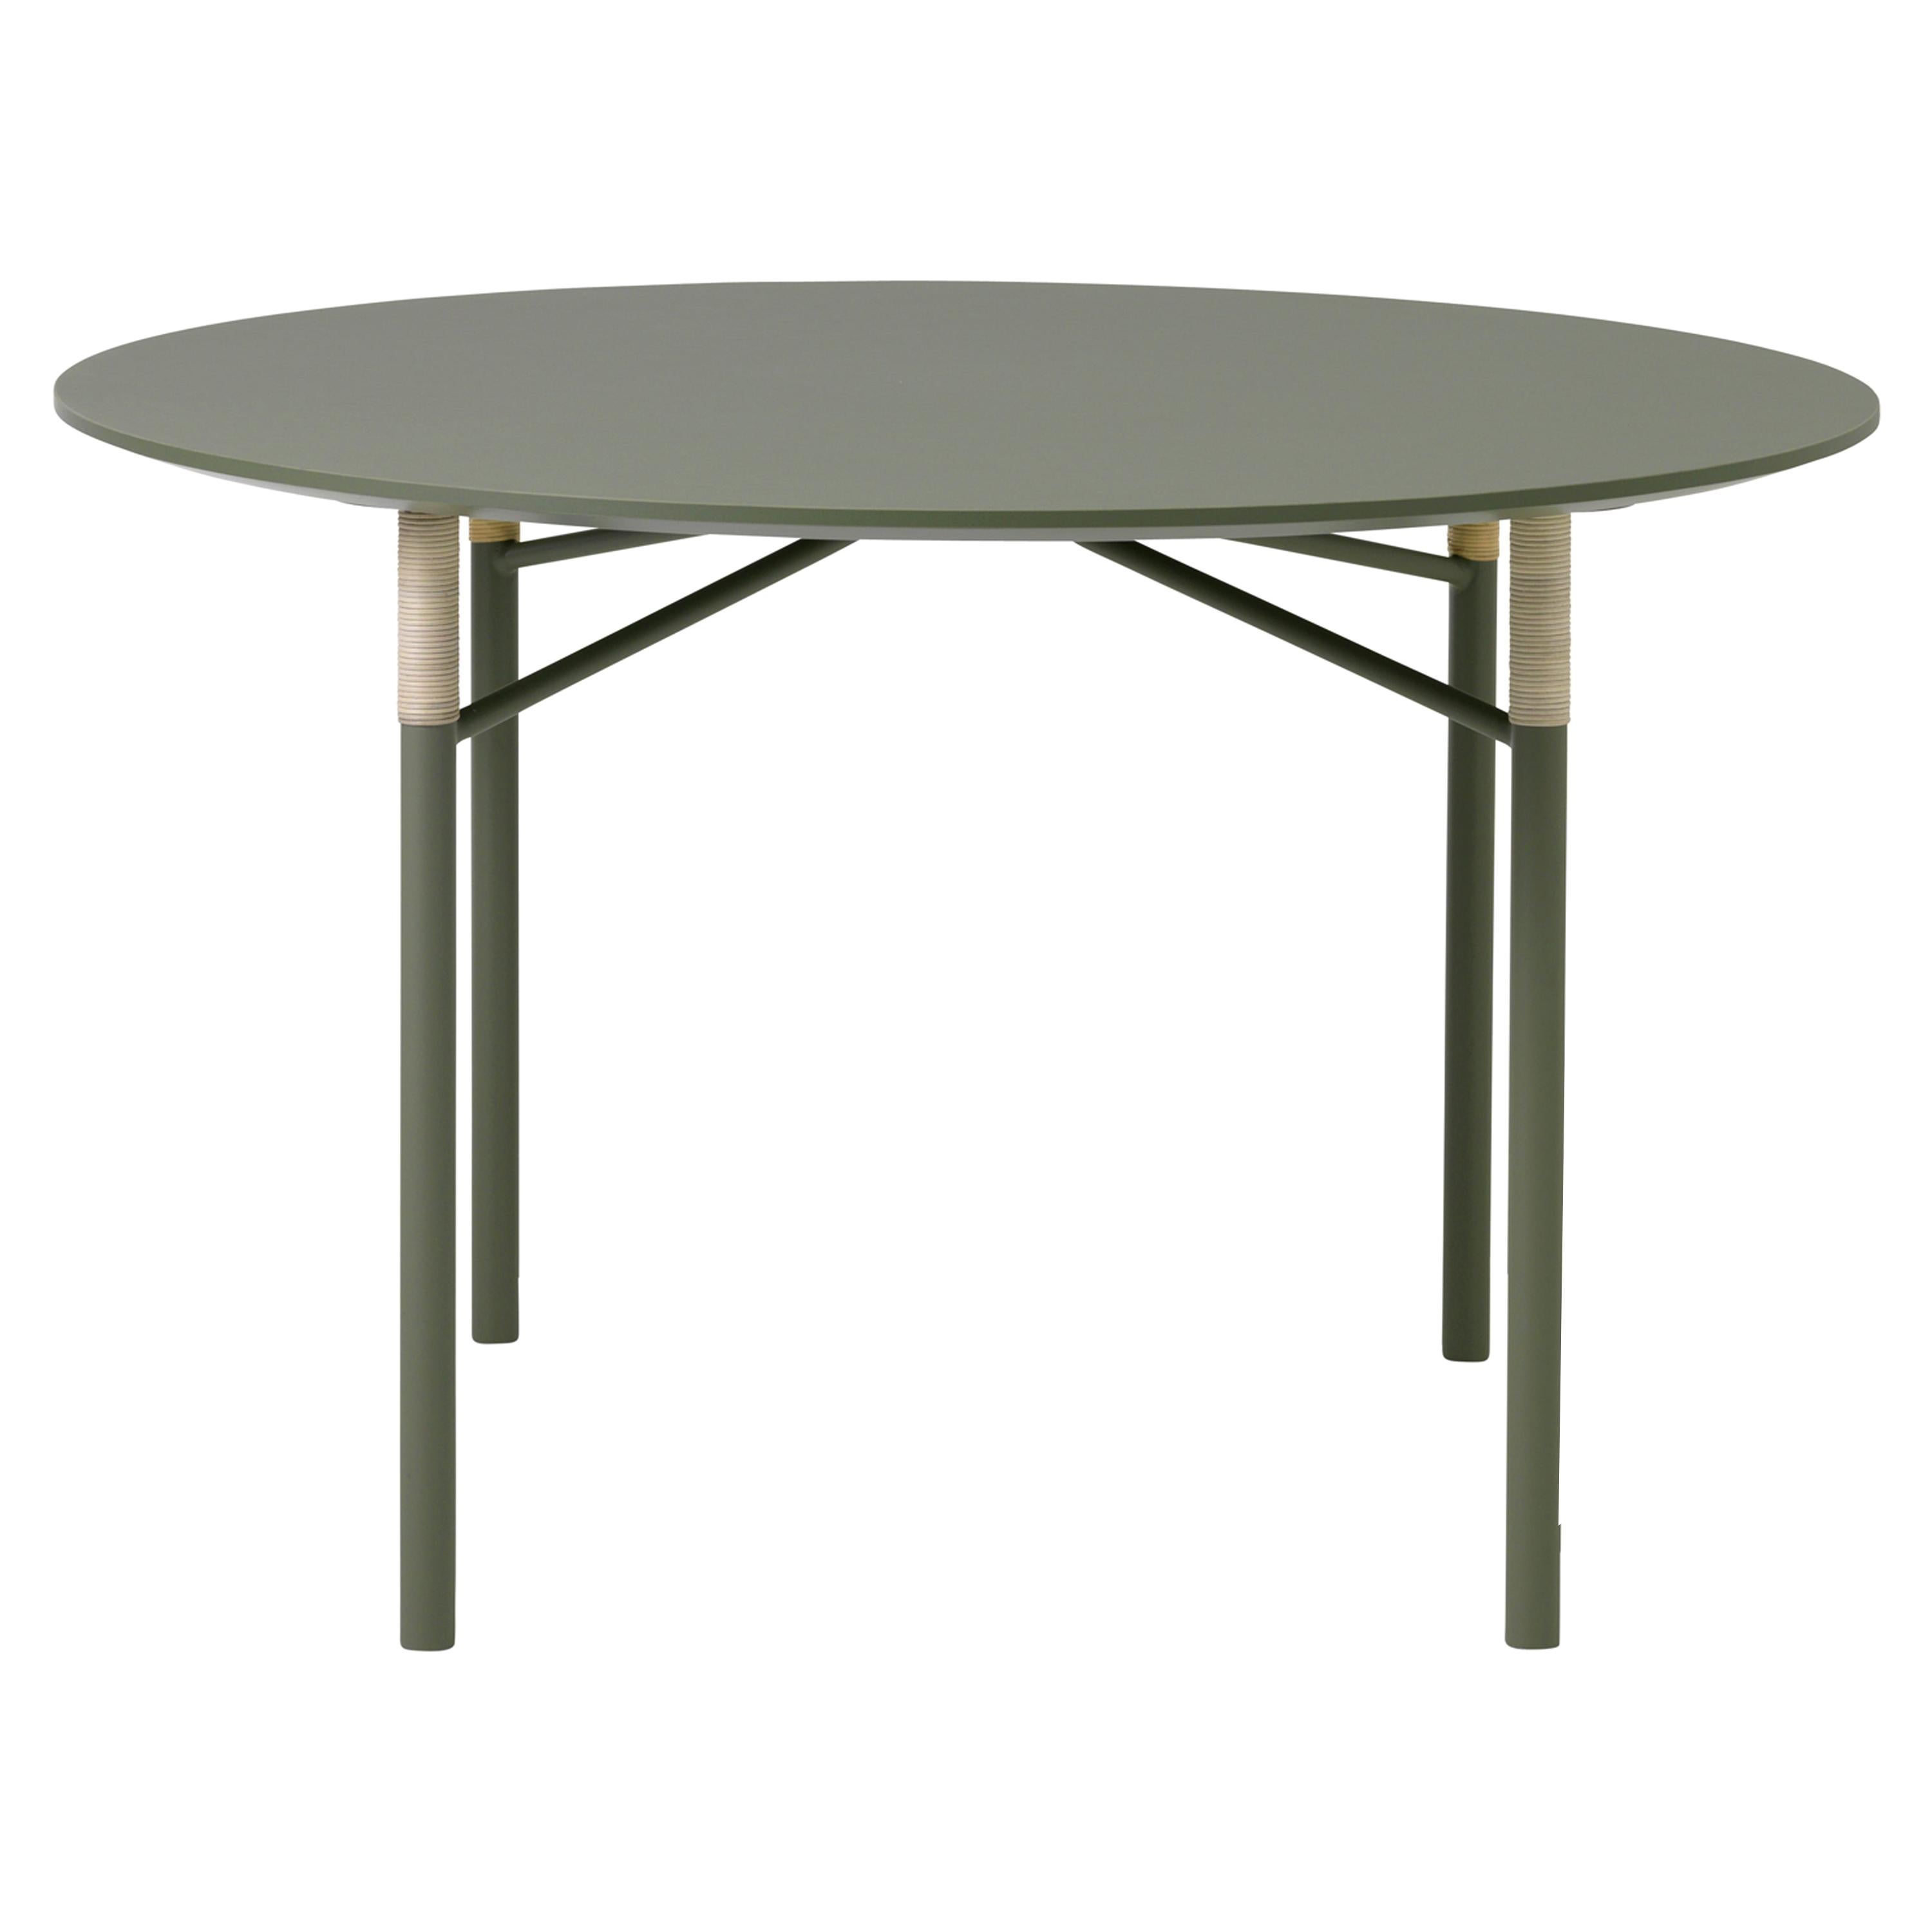 Affinity Round Dining Table, by Halskov & Dalsgaard from Warm Nordic